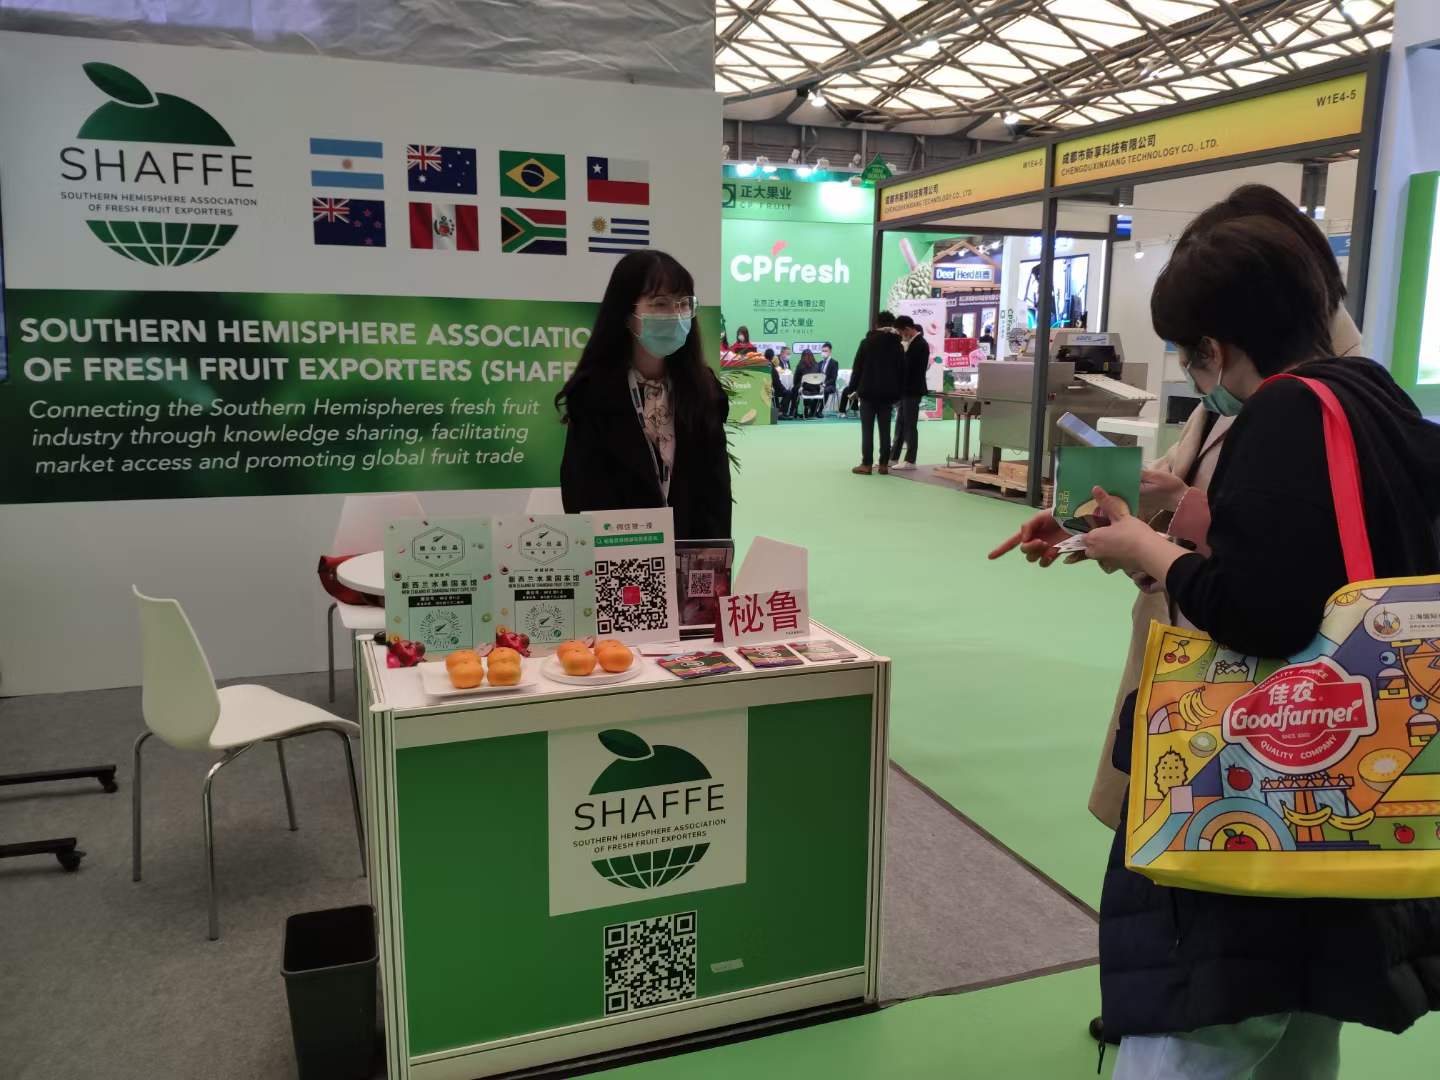 SHAFFE attends Shanghai International Fruit Expo to consolidate ties of friendship, and positioning of Southern Hemisphere Fruit Exporters